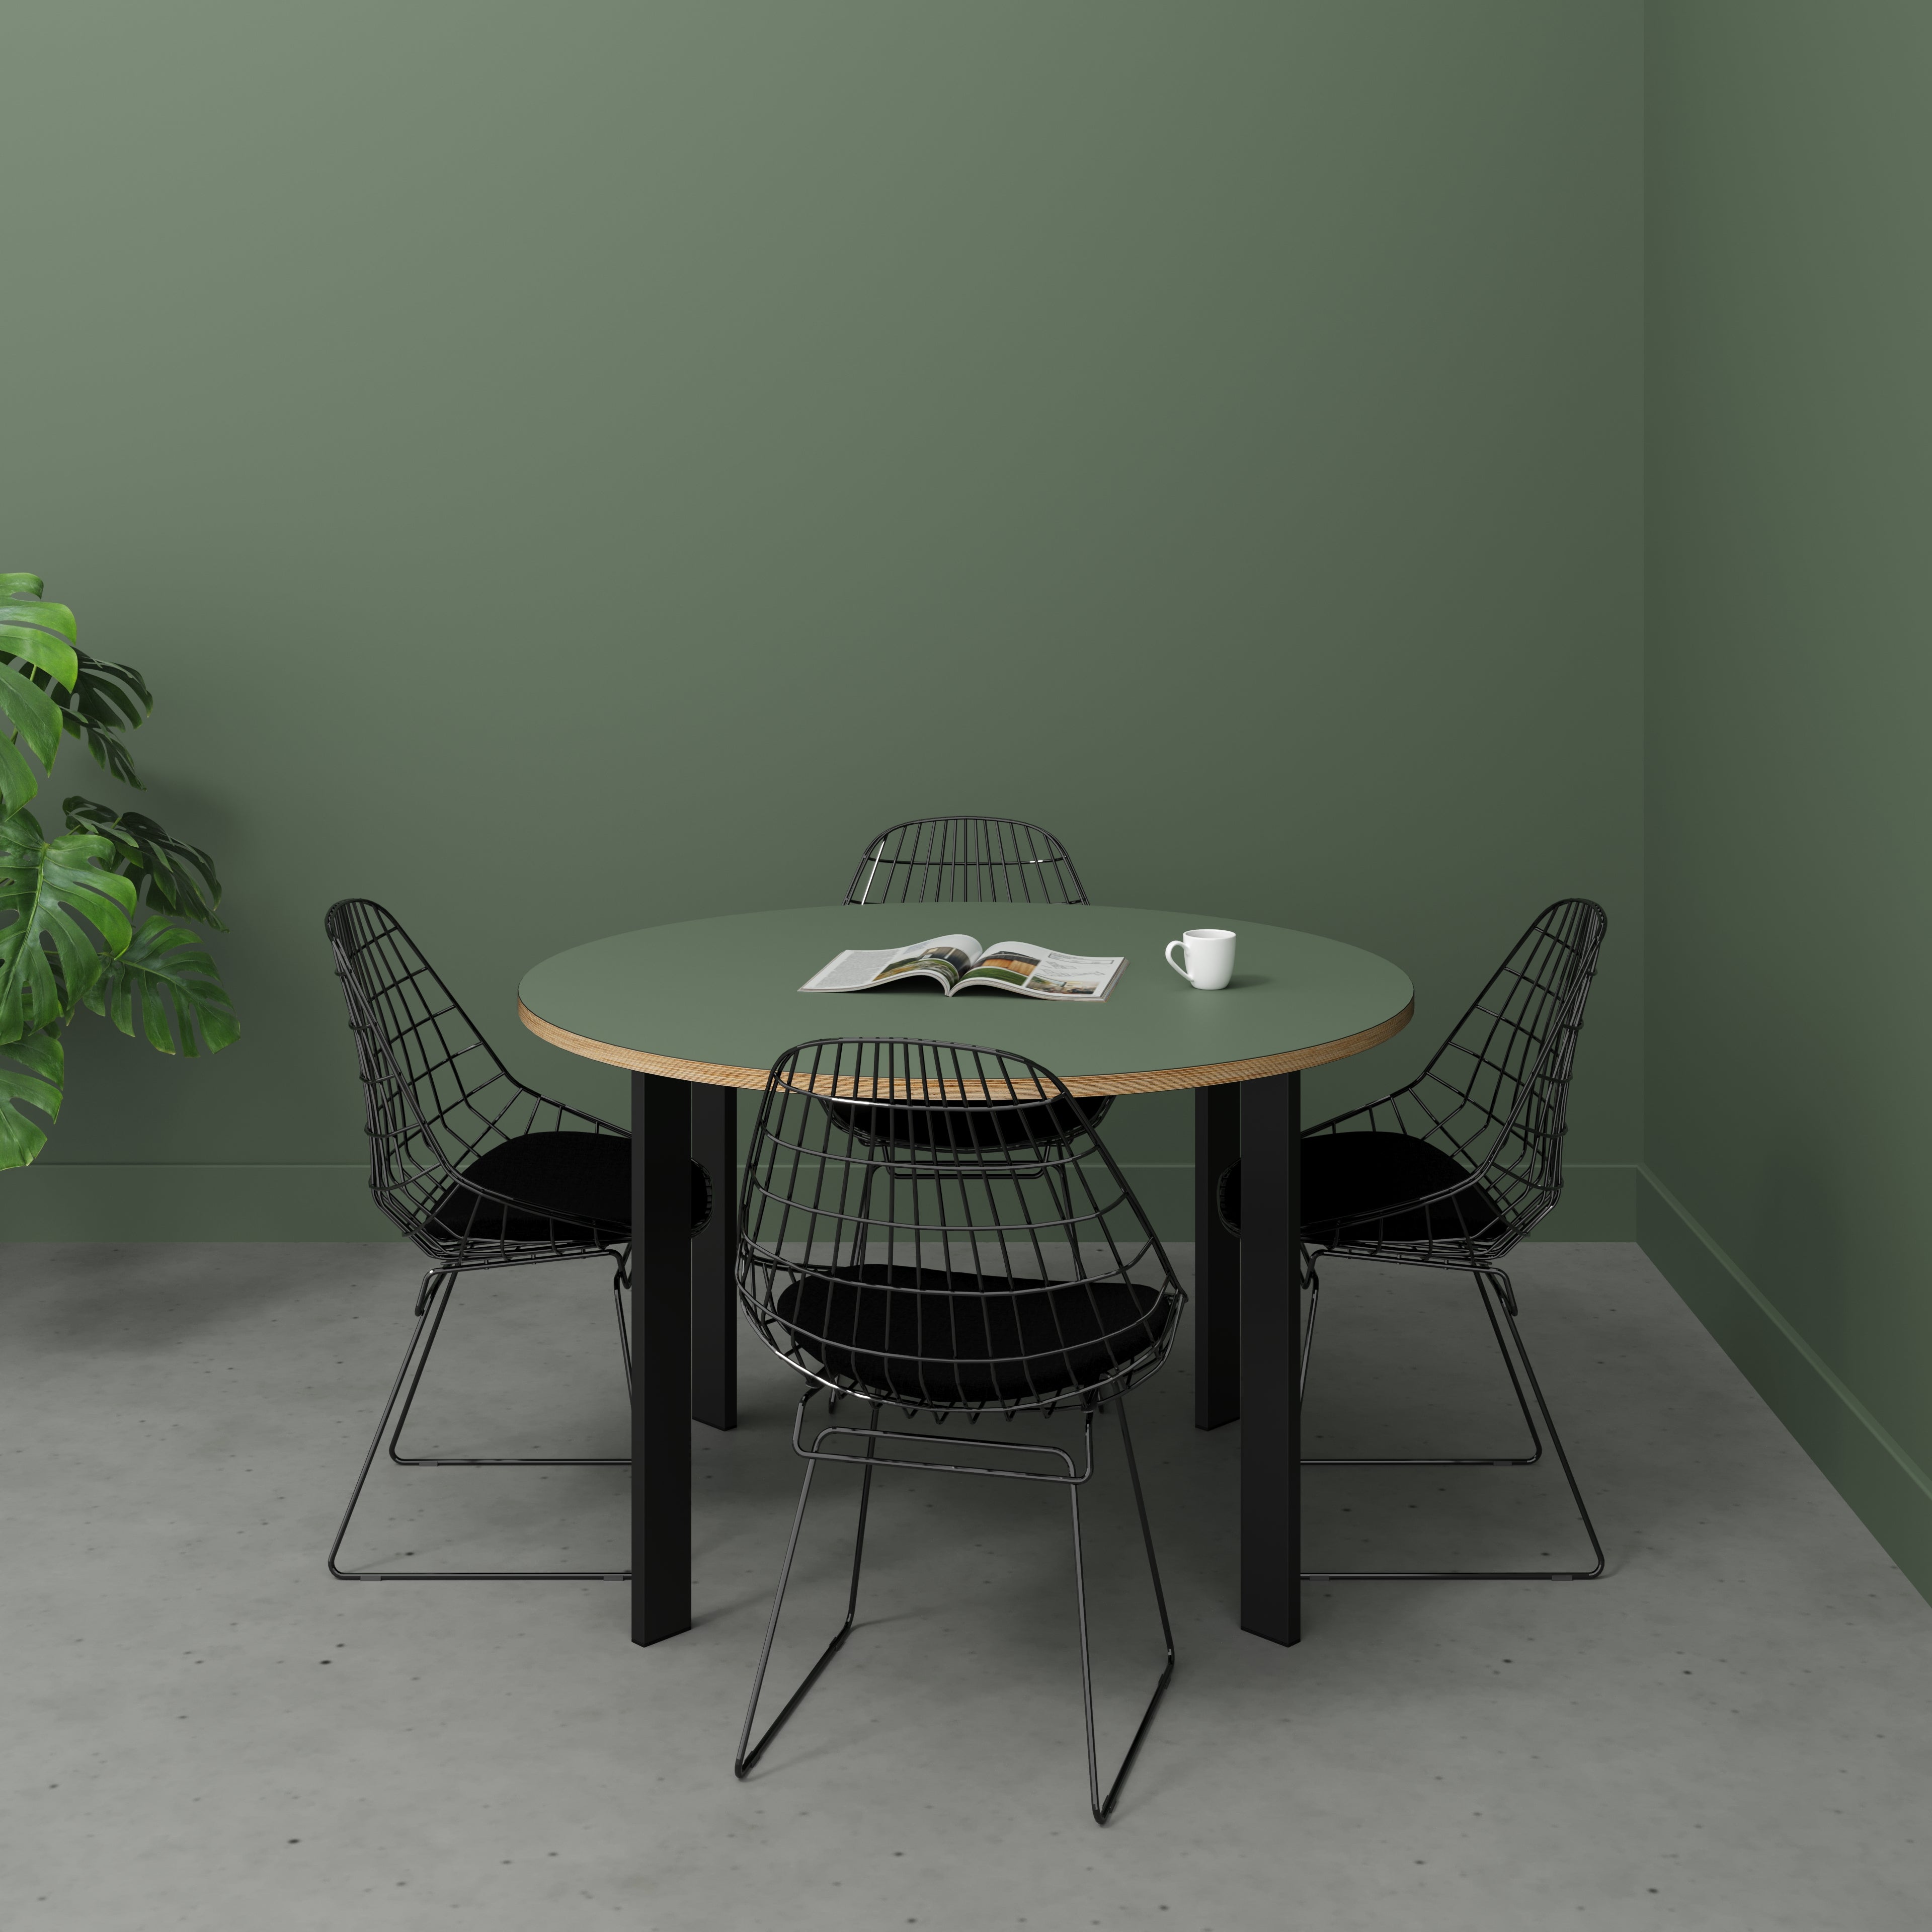 Round Table with Black Rectangular Single Pin Legs - Formica Green Slate - 1200(dia) x 750(h)